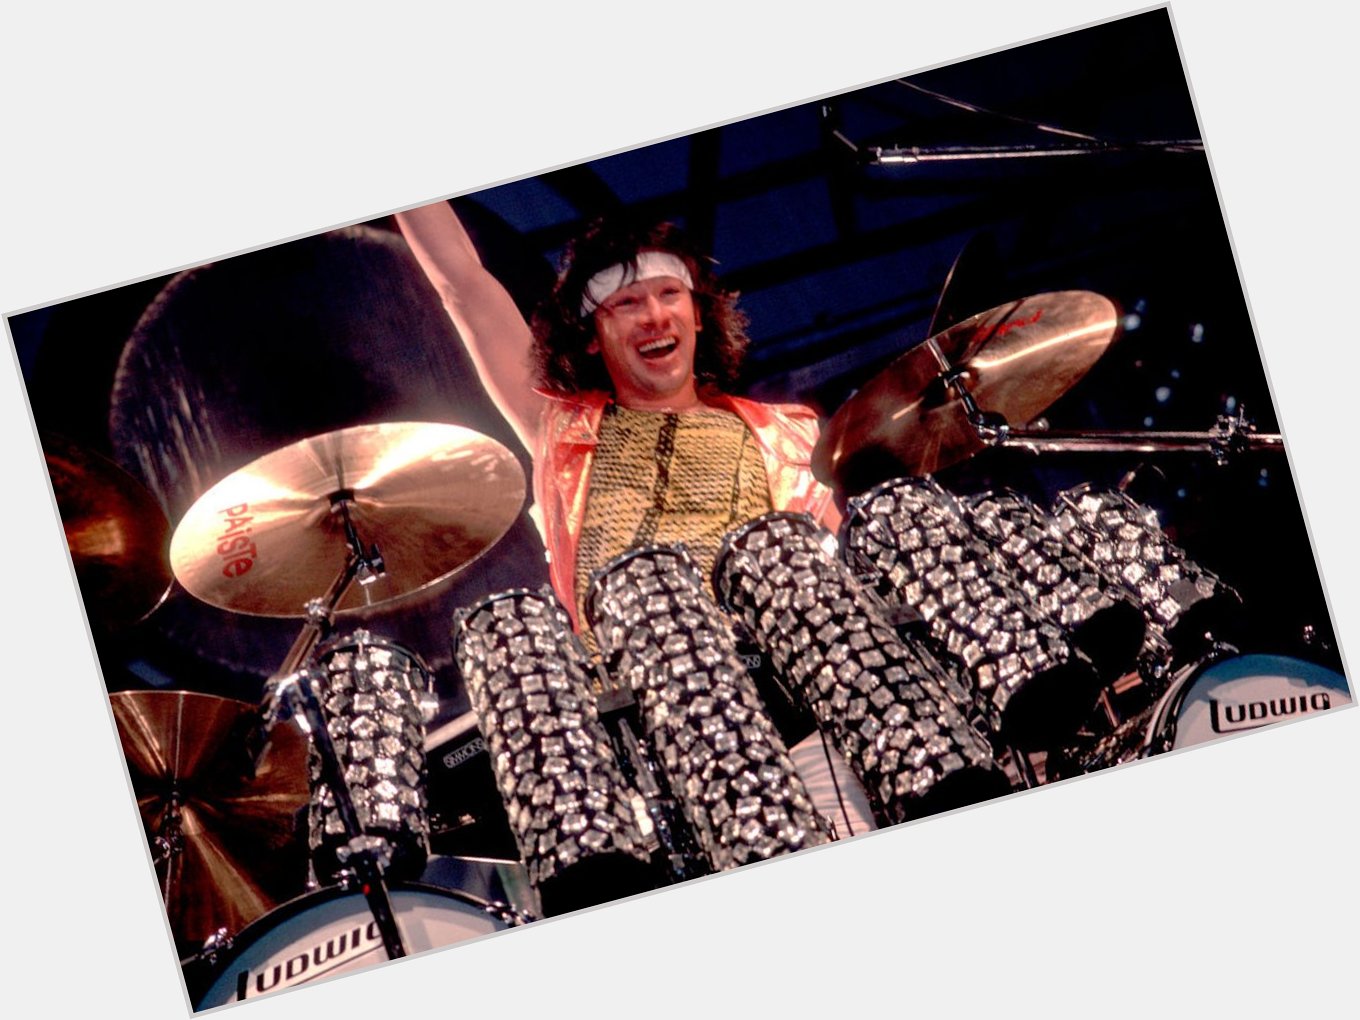 Happy belated 70th birthday to one of my all-time favorite drummers... the GREAT Alex Van Halen. 